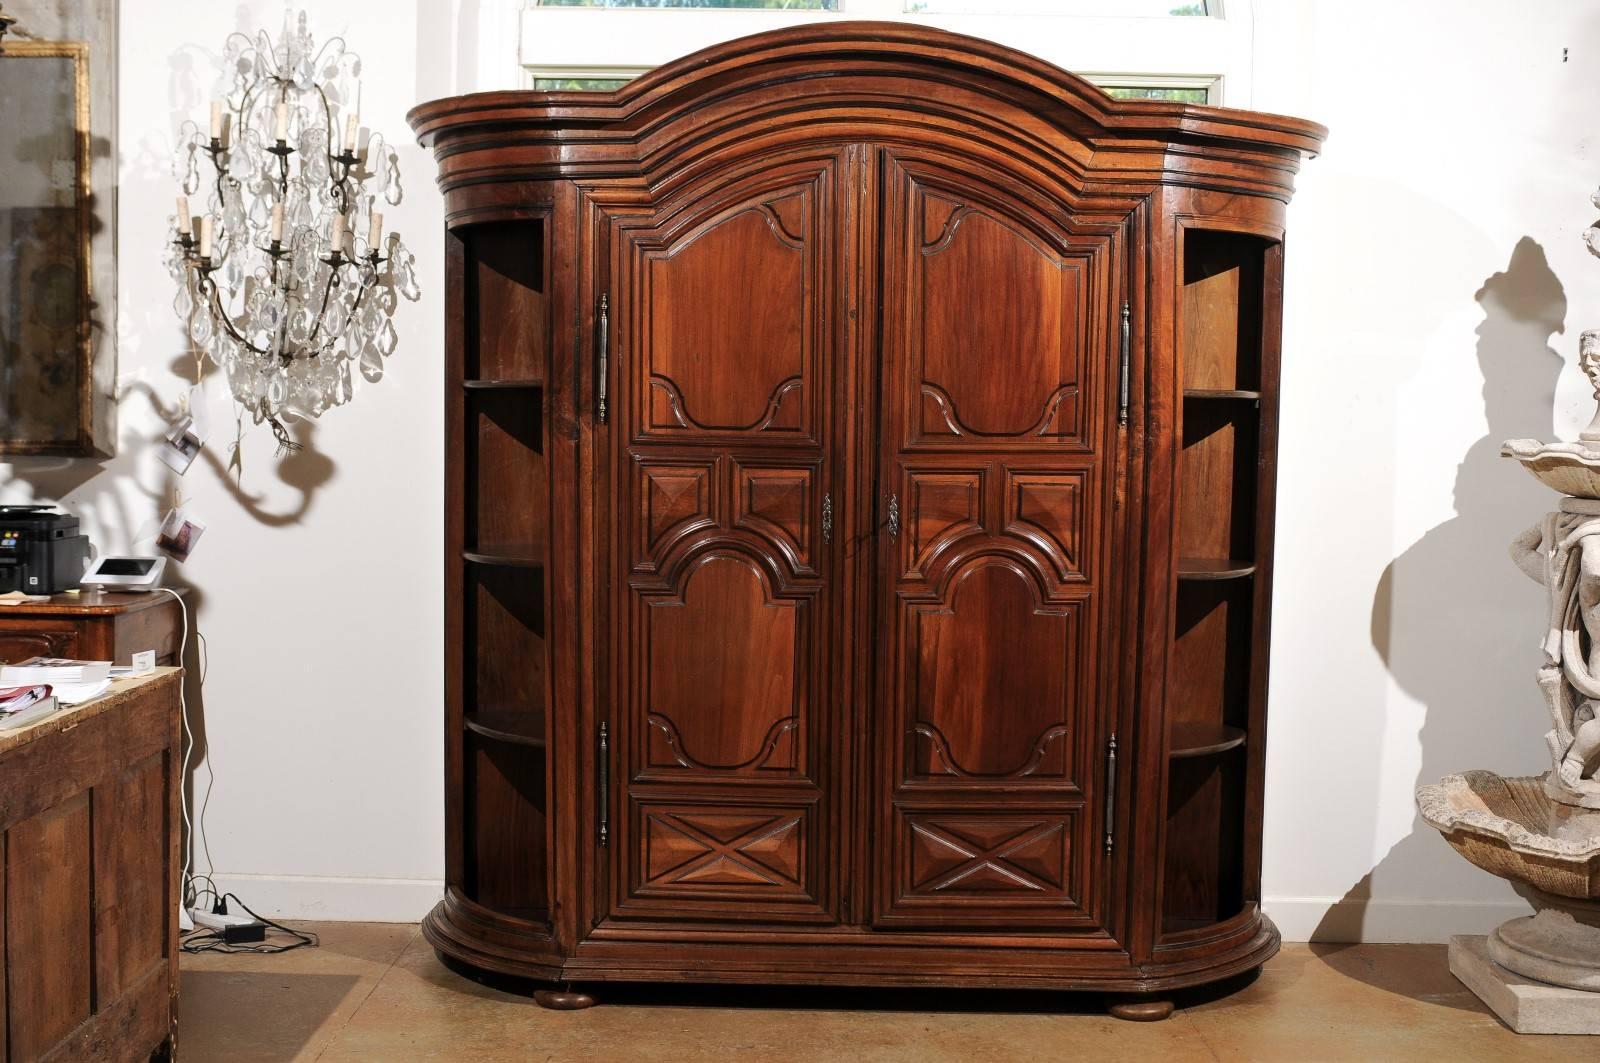 A French Louis XIII style walnut armoire with bonnet-shaped pediment, curved open side shelves, geometric motifs and original hardware from the early 19th century. This French armoire was born in the second decade of the 19th century, in an ever